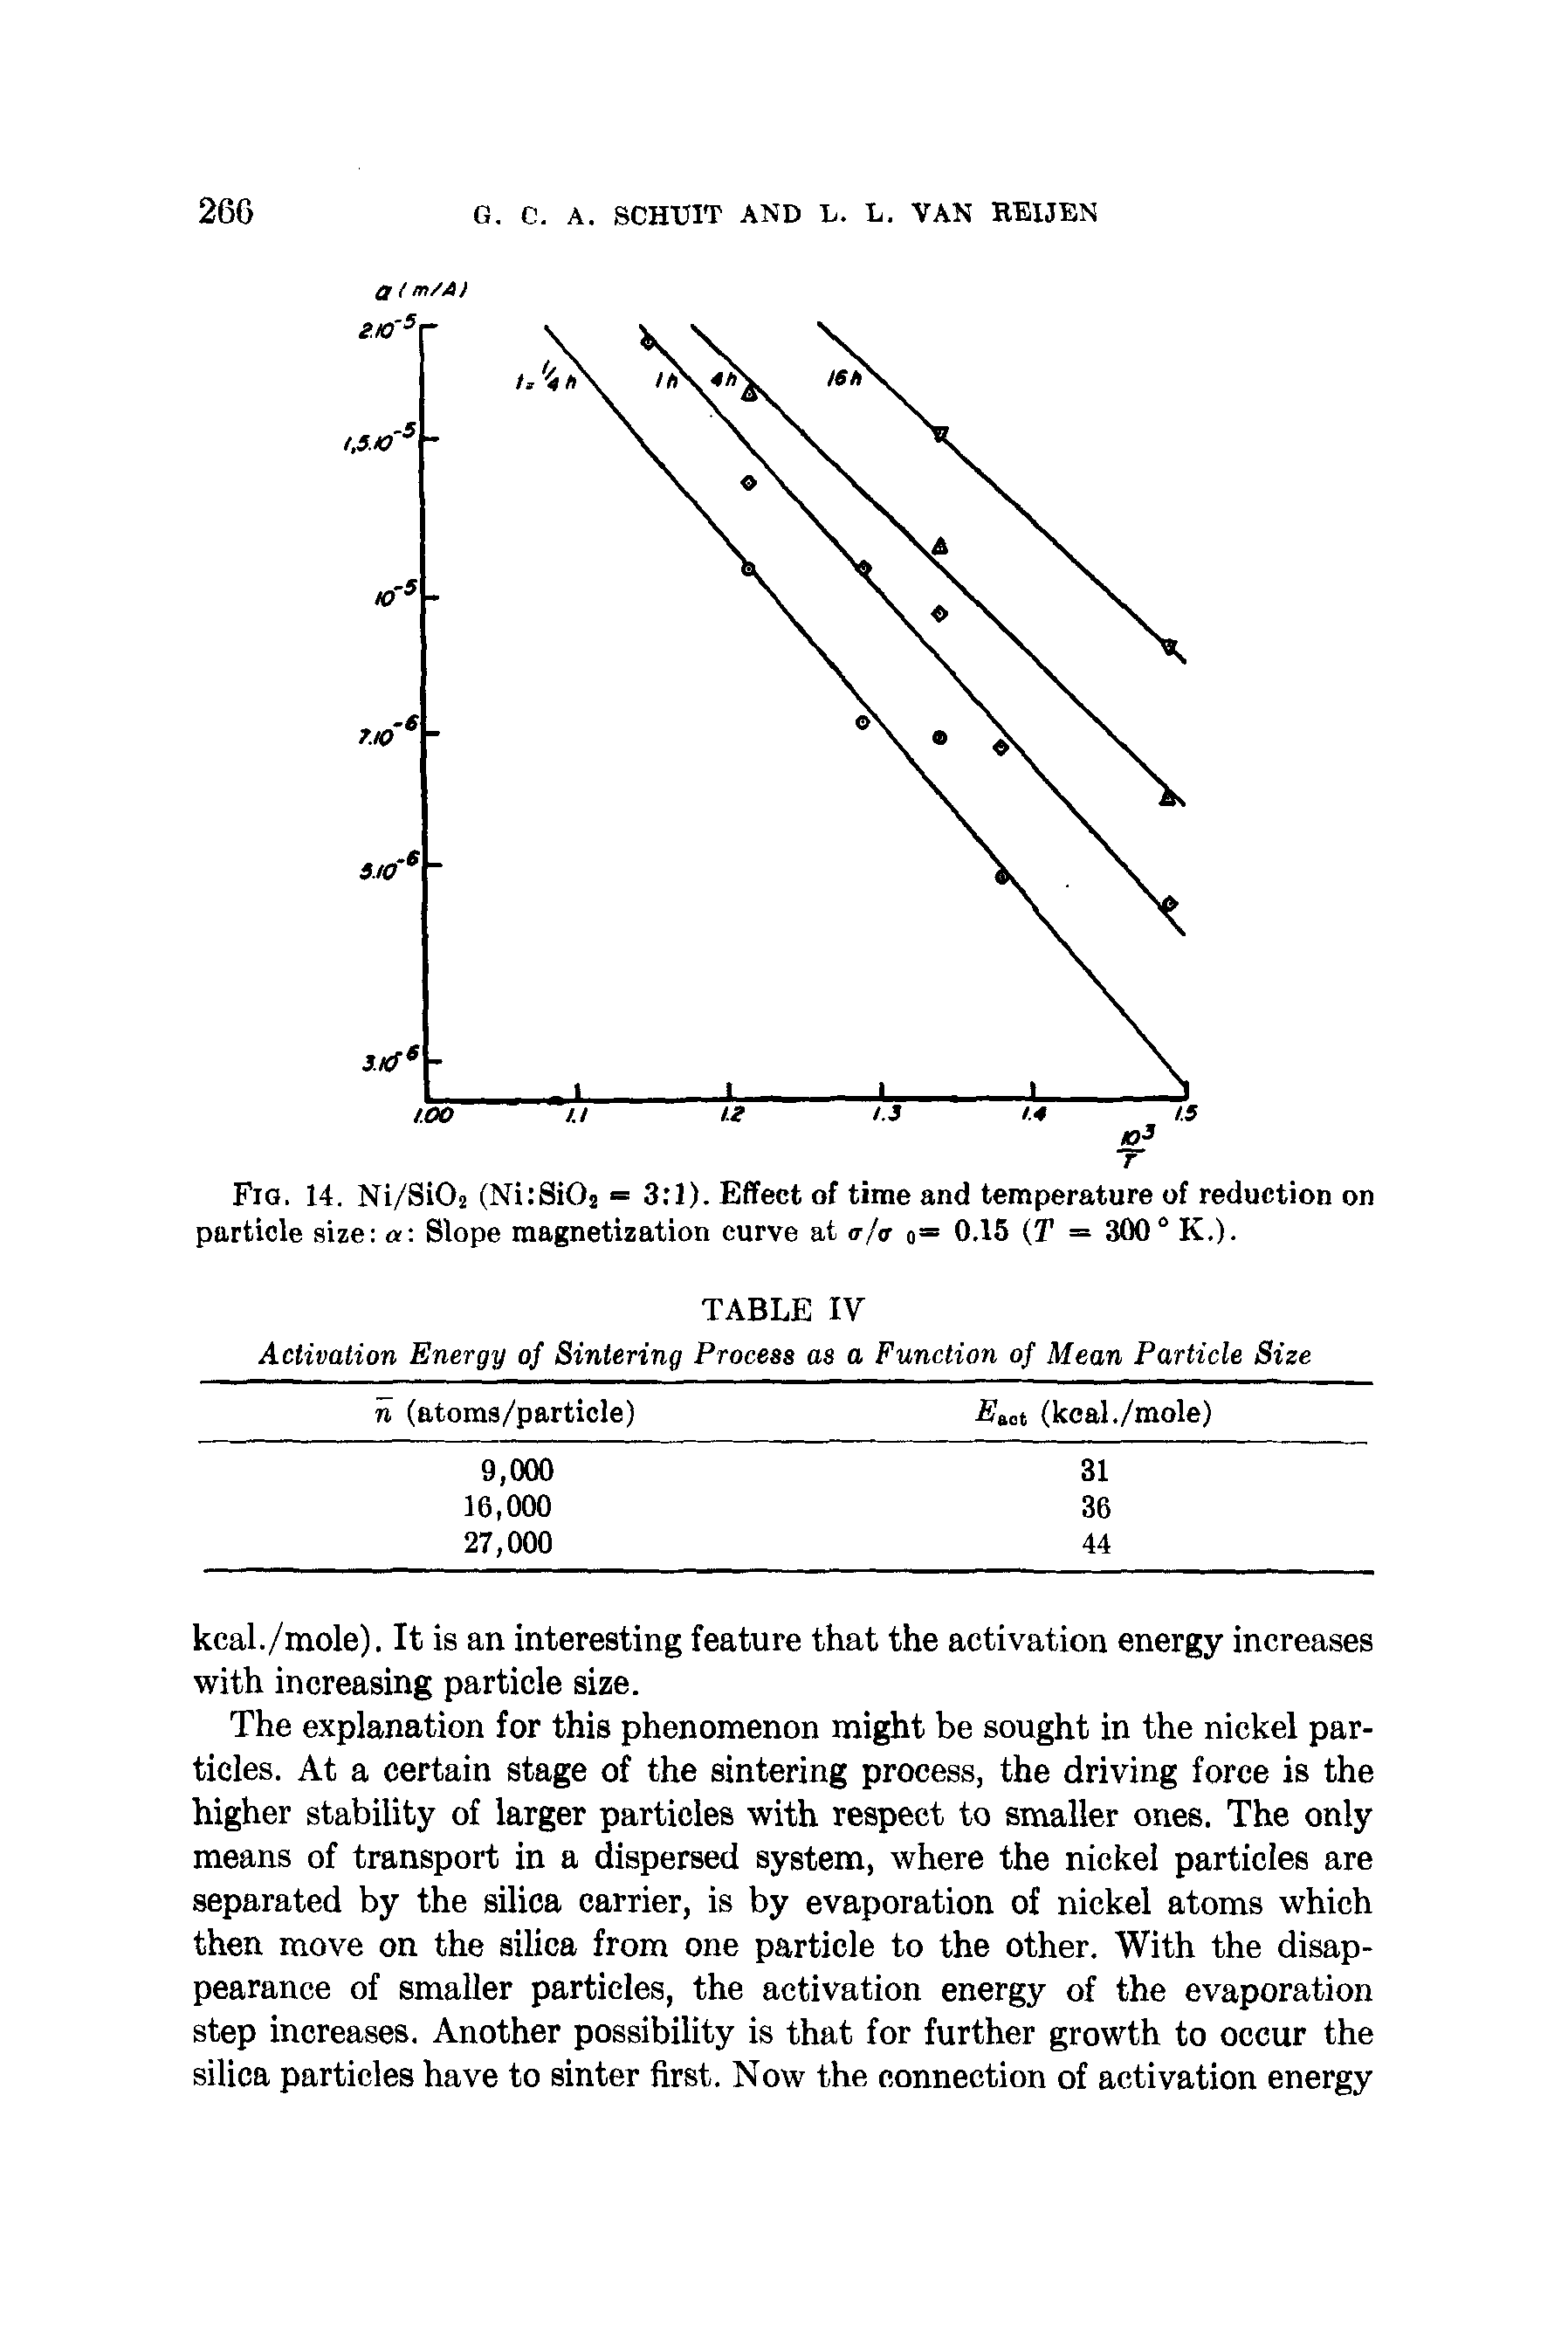 Fig. 14. Ni/Si02 (Ni Si02 = 3 1). Effect of time and temperature of reduction on particle size a Slope magnetization curve at <r/<r 0= 0.15 (T = 300° K.).